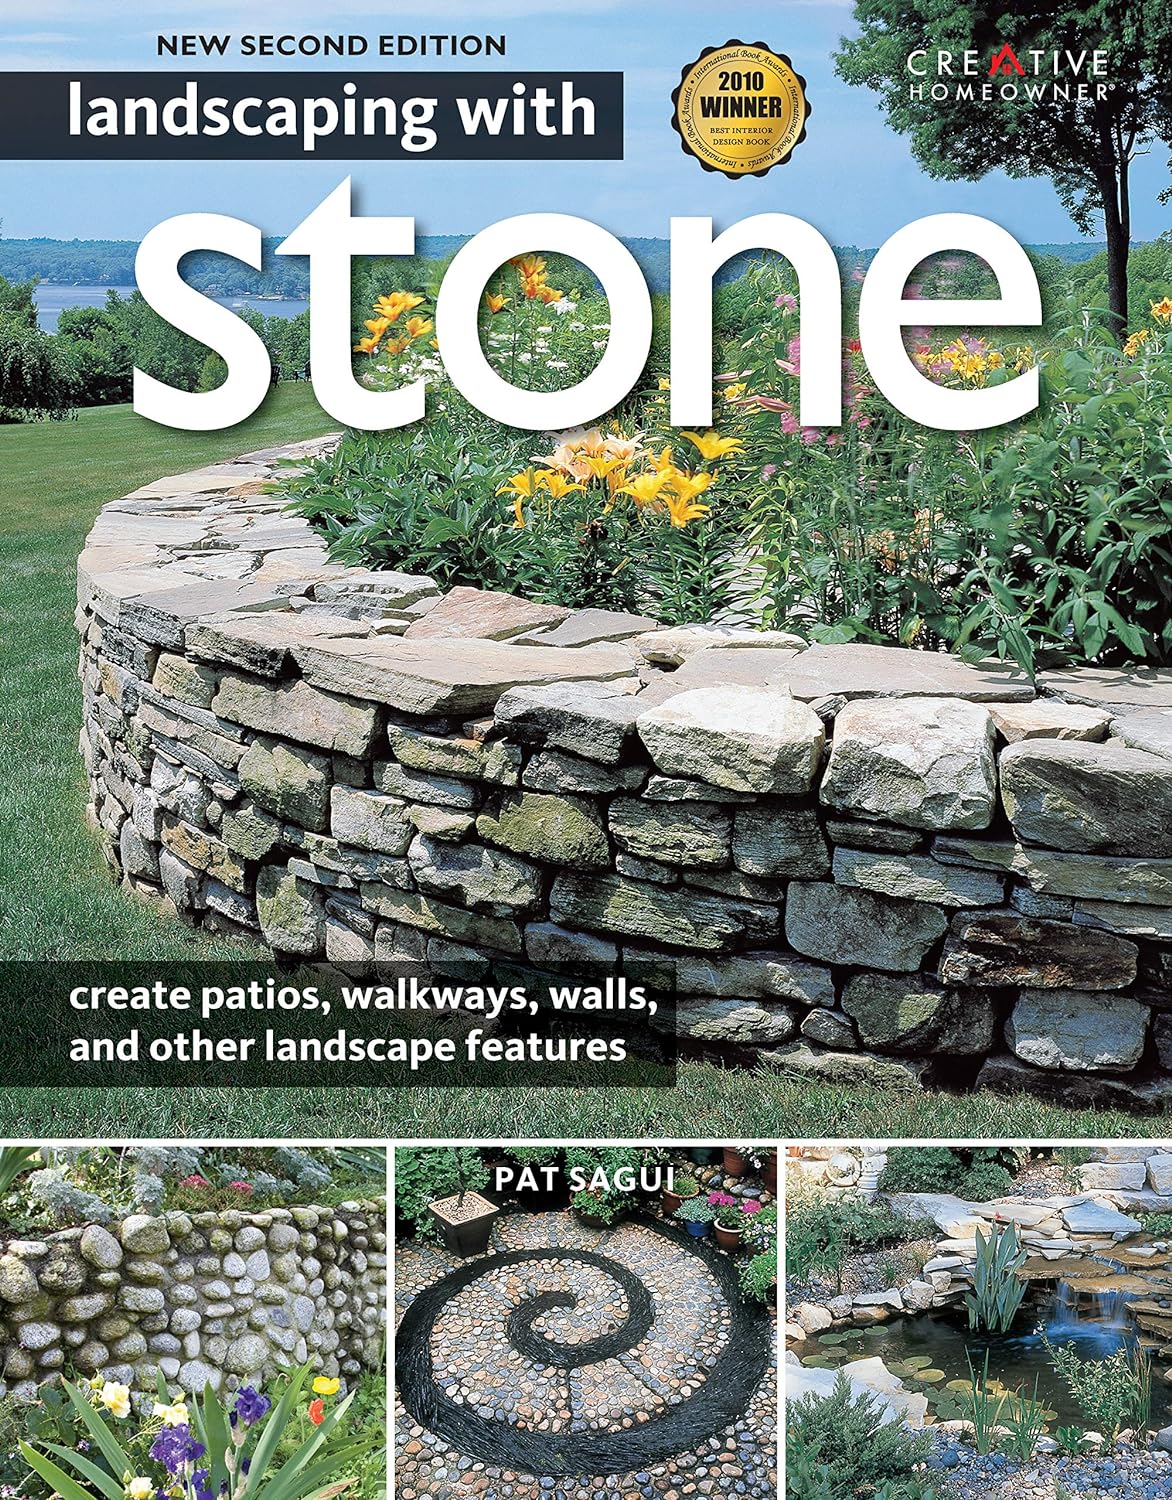 Landscaping with Stone, 2nd Edition: Create Patios, Walkways, Walls, and Other Landscape Features (Creative Homeowner) Over 300 Photos & Illustrations; Learn to Plan, Design, & Work with Natural Stone Paperback  March 1, 2009